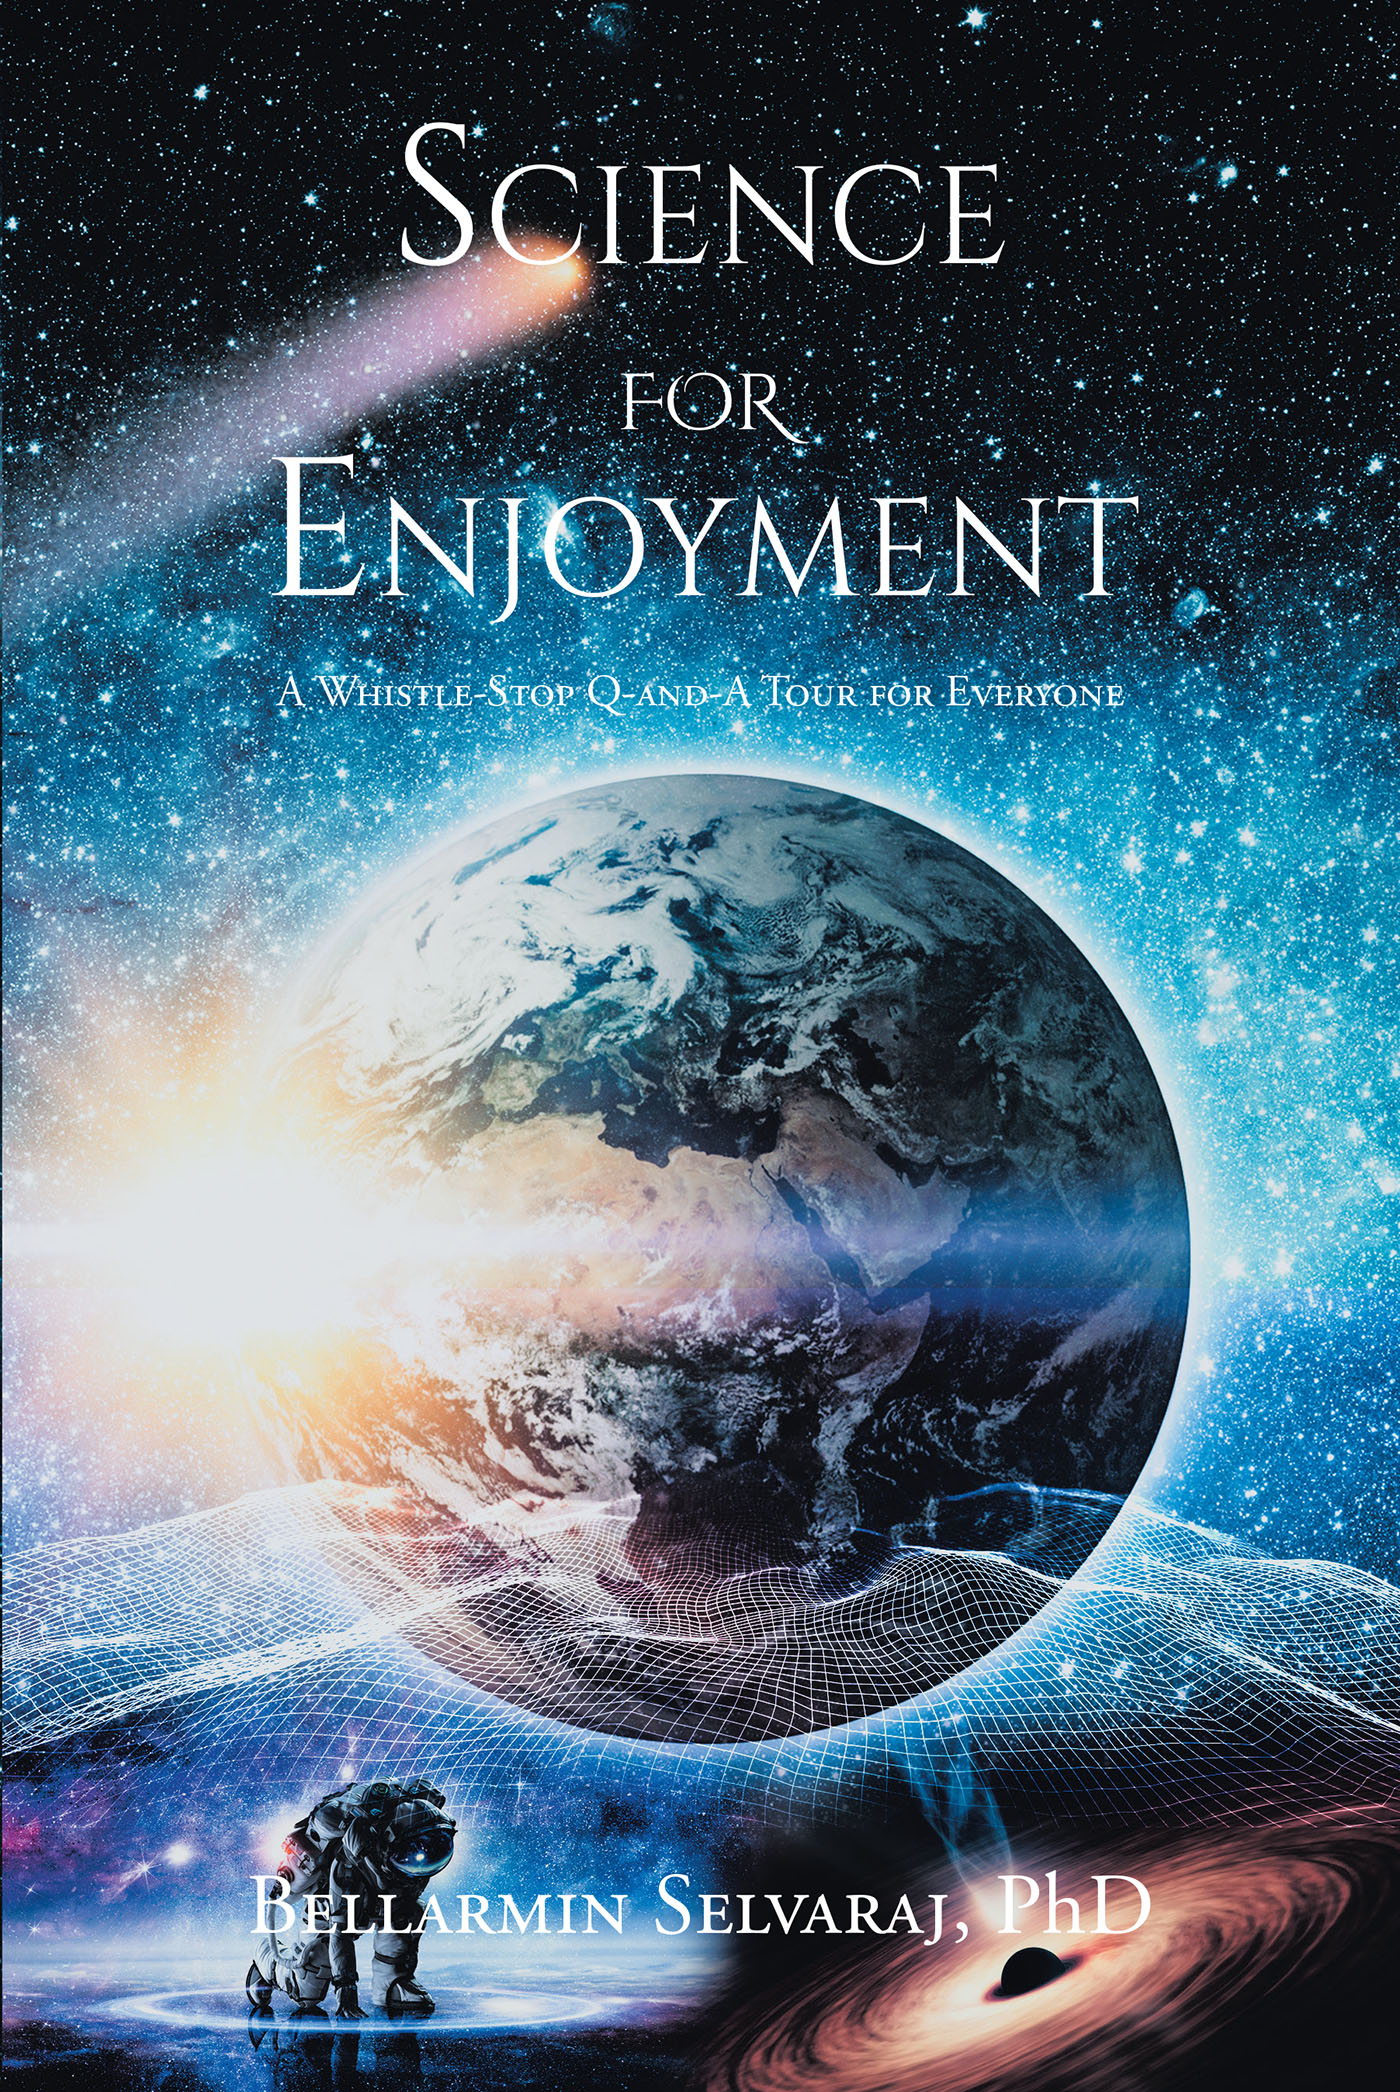 Author Bellarmin Selvaraj, PhD’s New Book, "Science for Enjoyment," is a Thoroughly Enjoyable Tour of Scientific Achievements and Concepts Through the Years